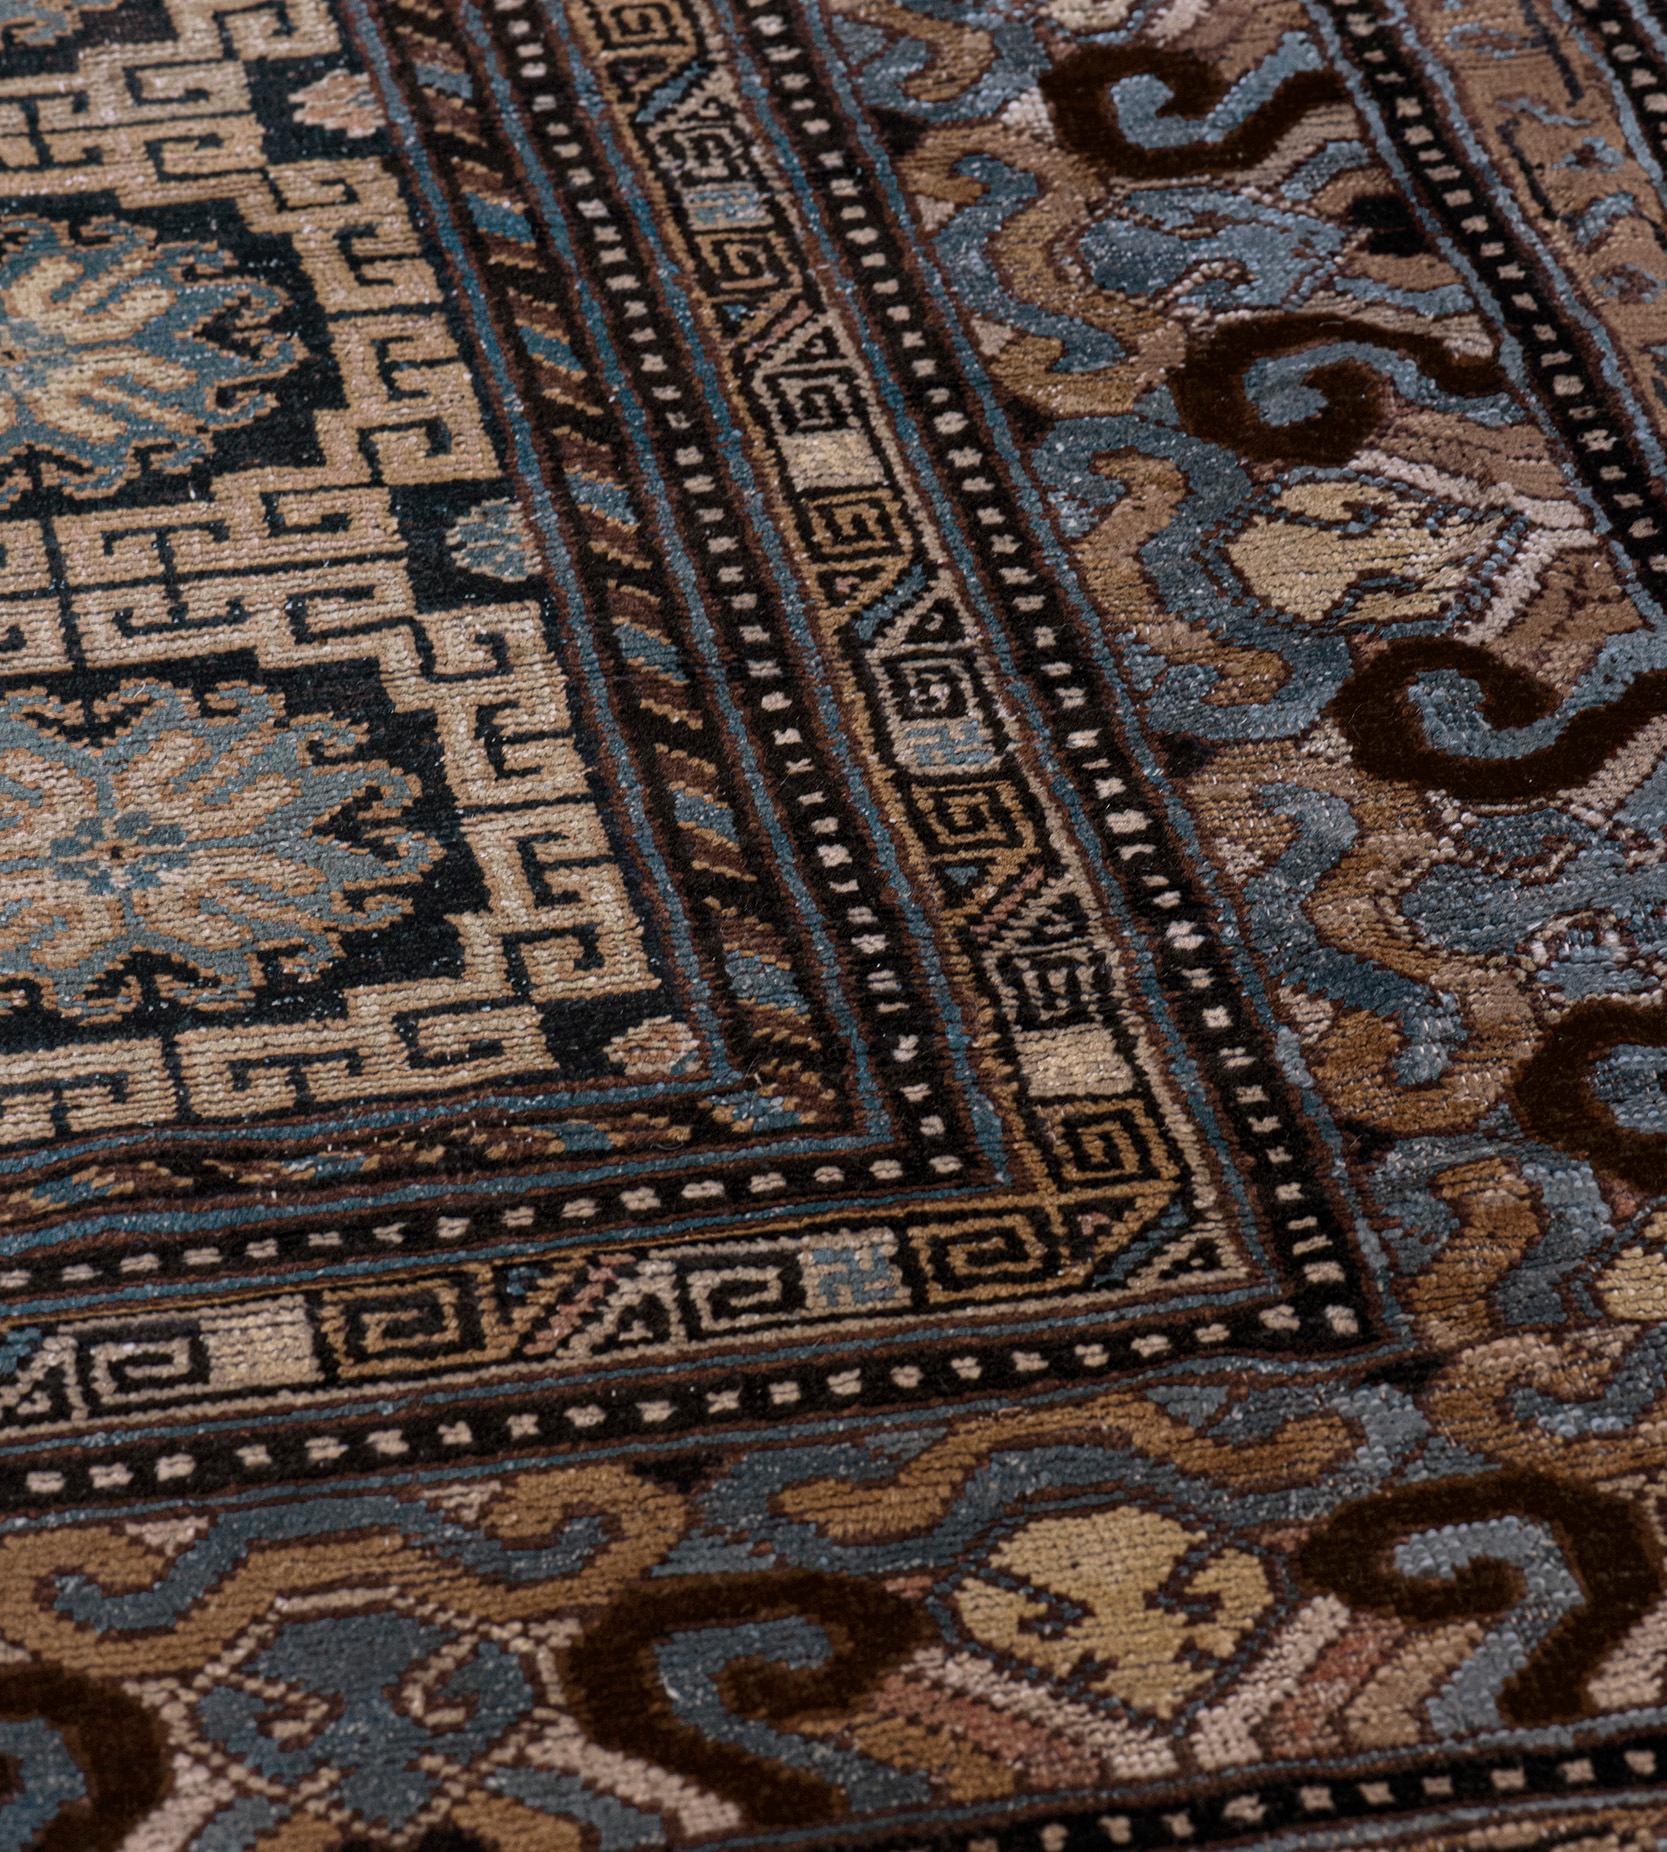 This traditional handwoven Samarkand Khotan rug has a field with five vertical rows of eight indigo and ivory square stepped panels containing rosettes divided by small rosette panels linked by a hooked vine, in an indigo, light brown and ivory